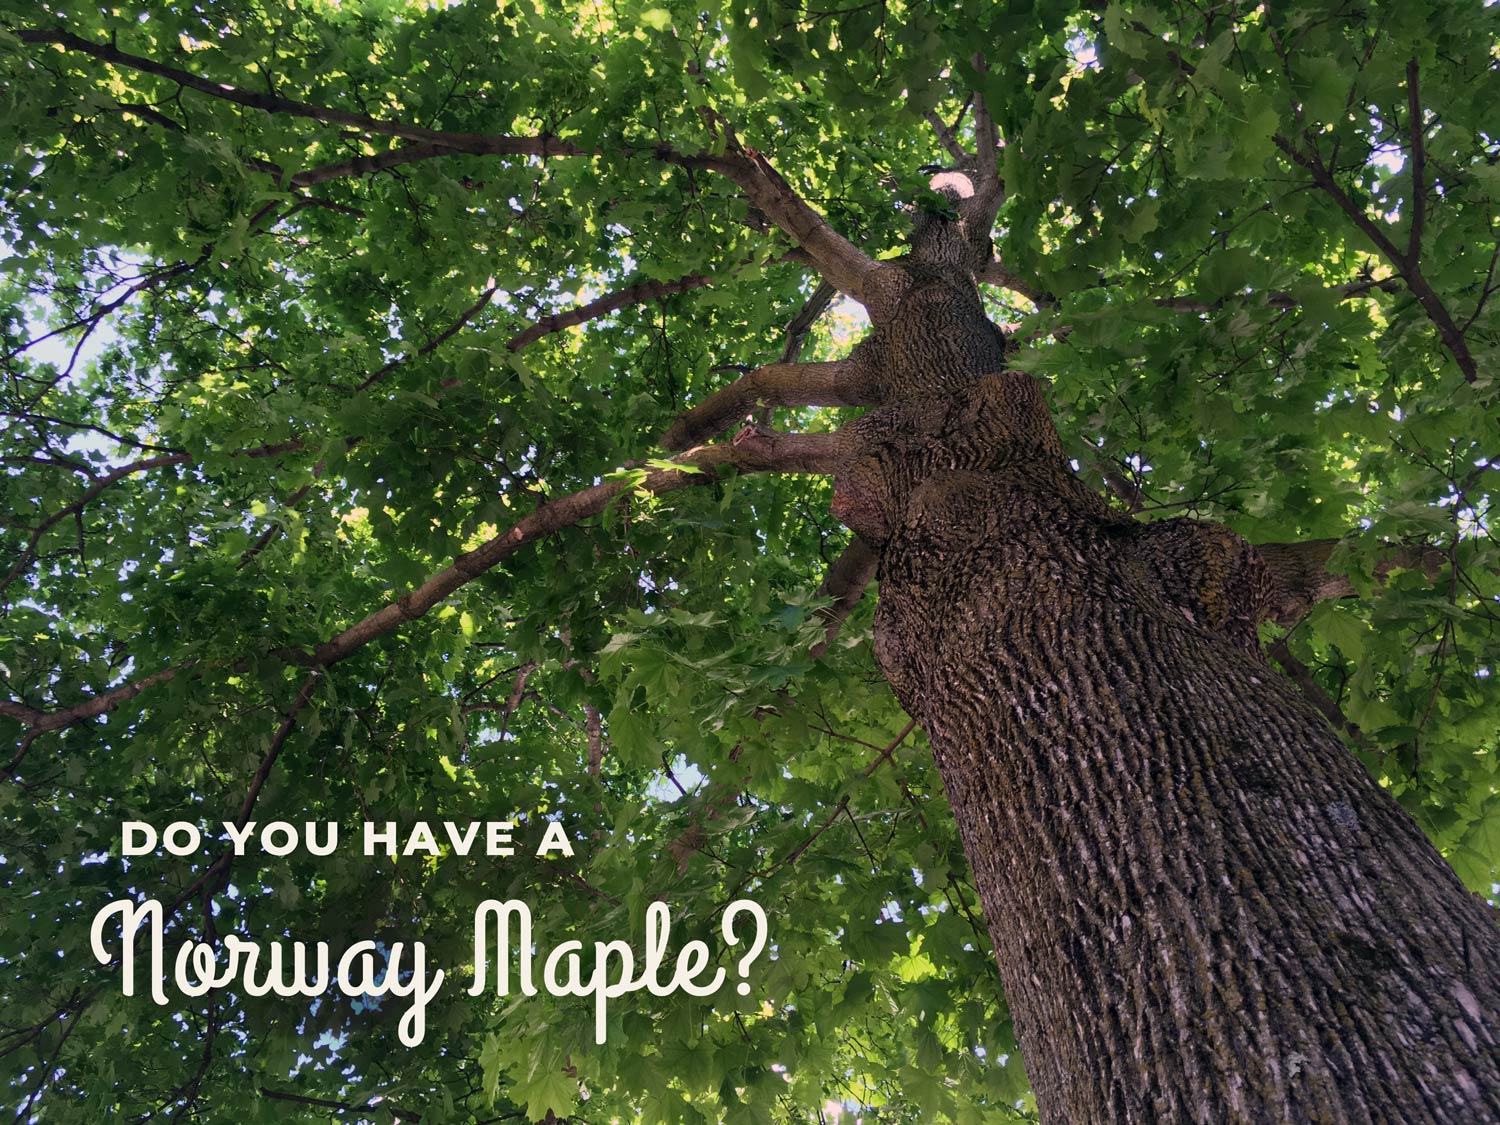 Yes, You CAN Tap a Norway Maple for Maple Syrup